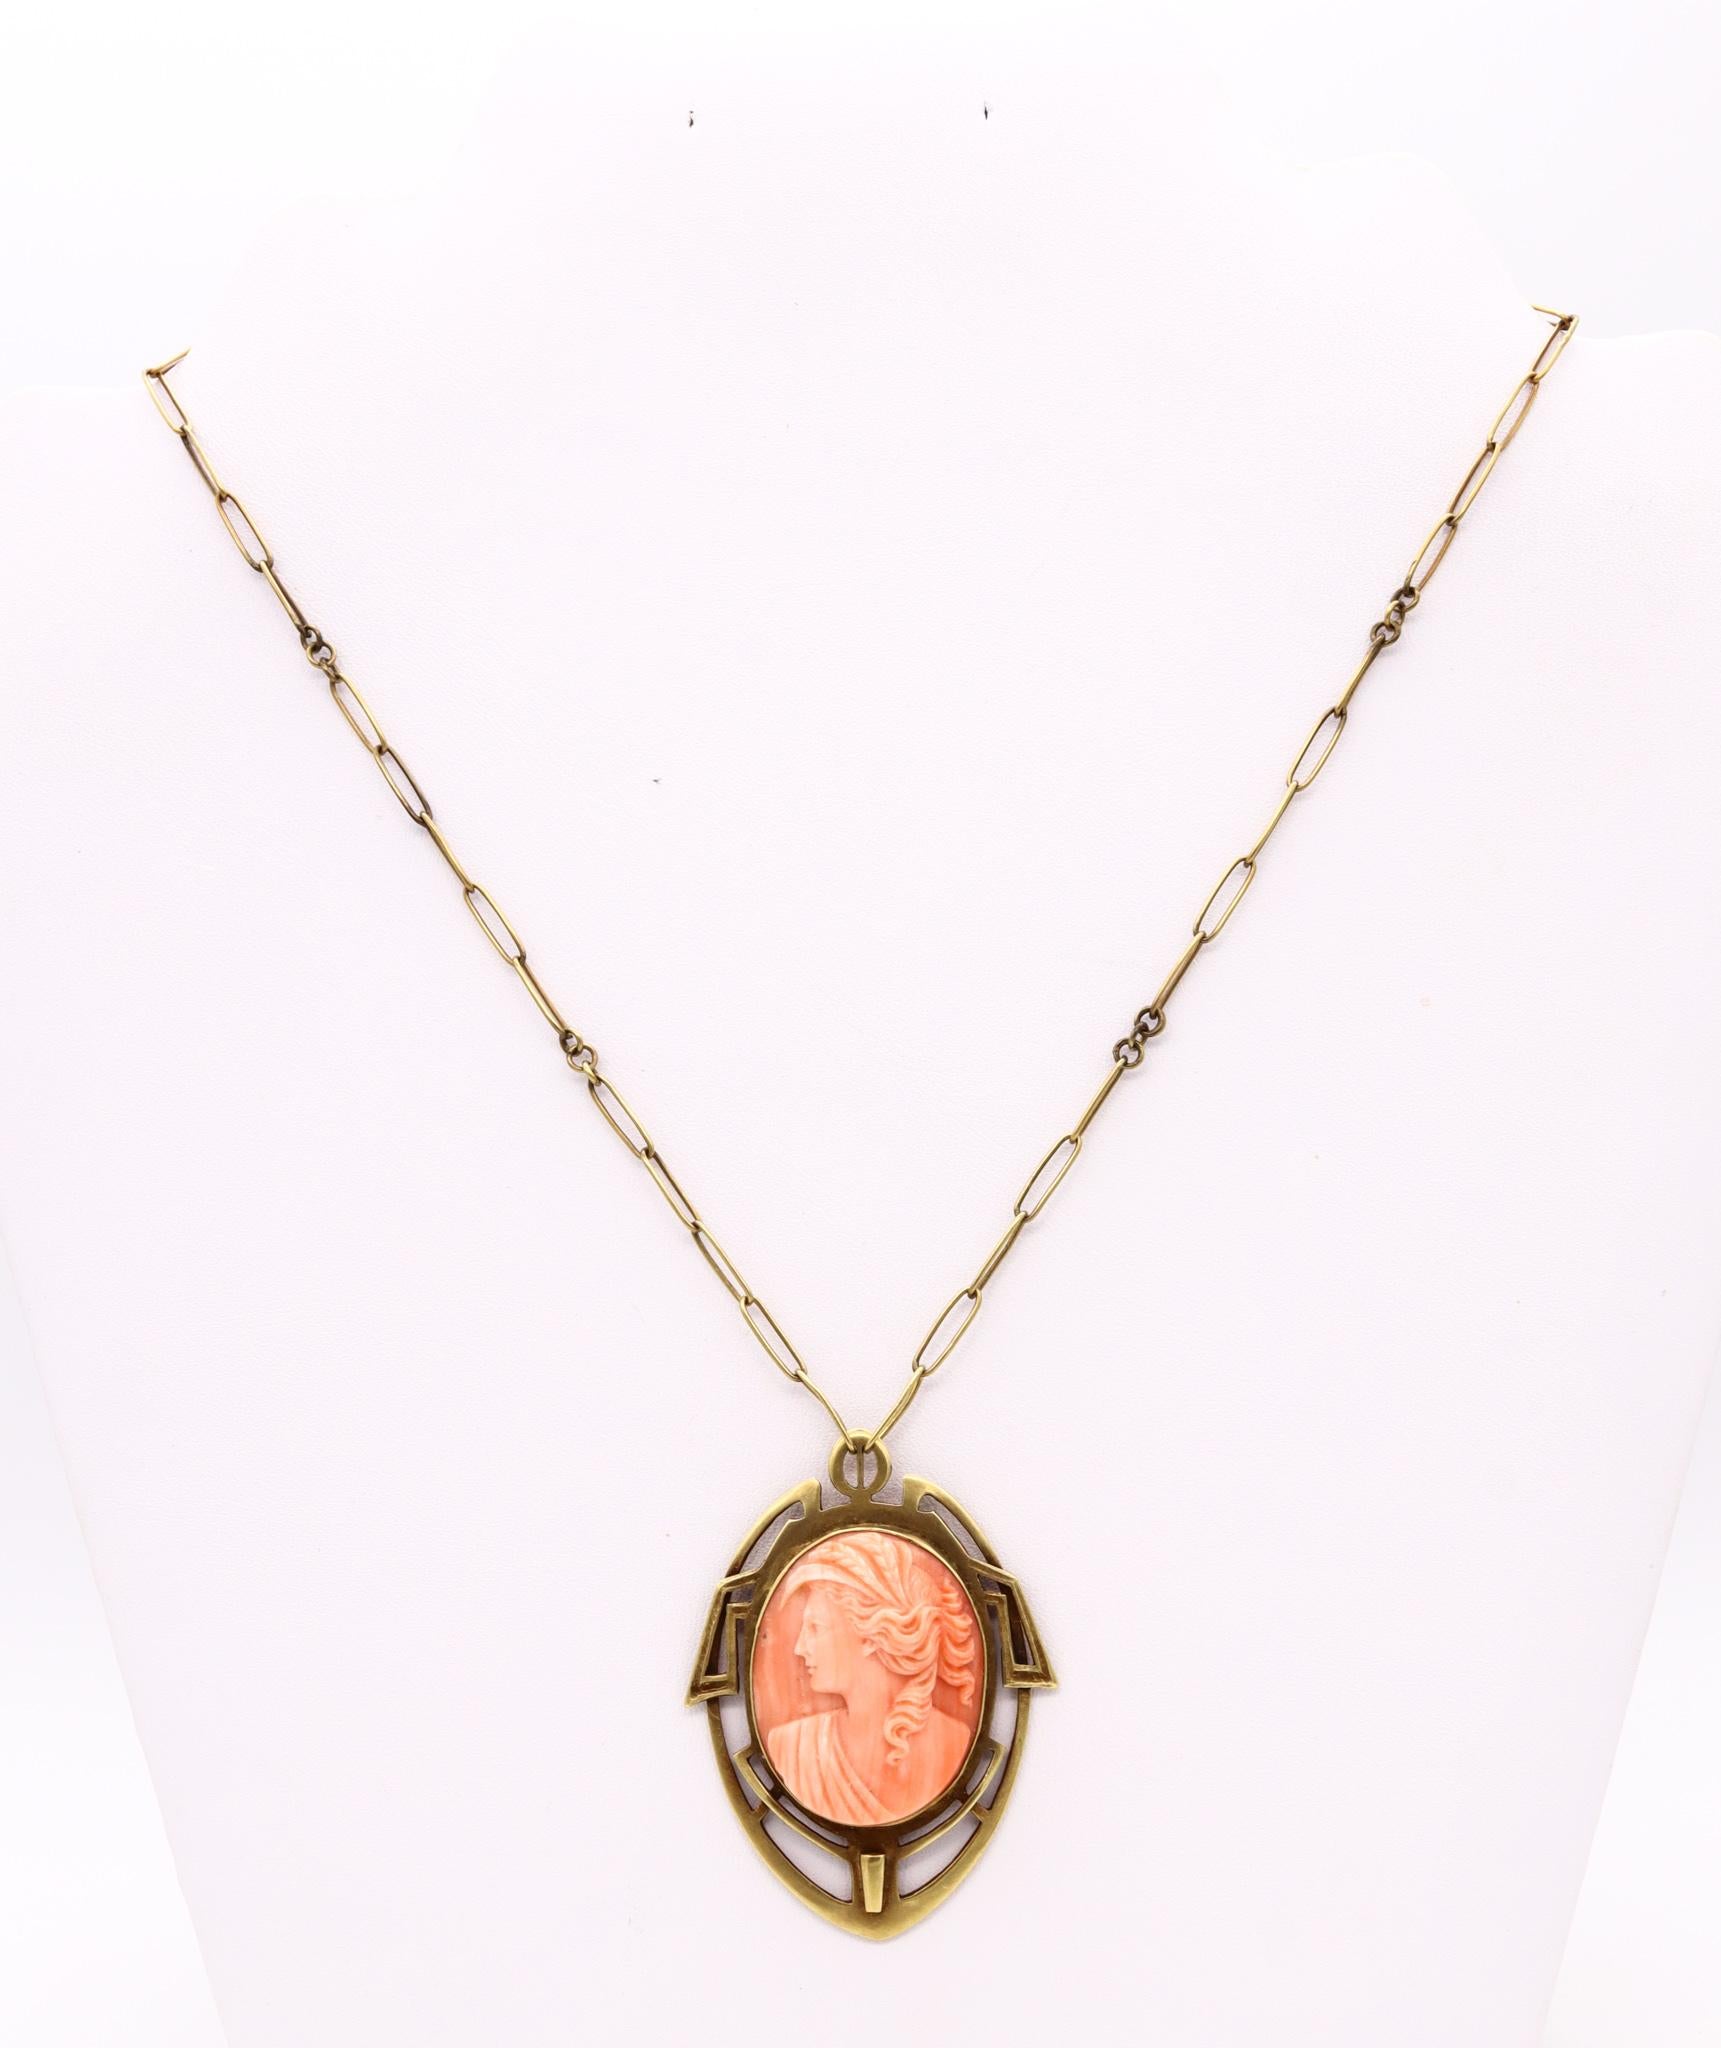 British 1890 Rare Liberty Art and Craft Geometric Necklace 18kt Gold Coral Cameo In Excellent Condition For Sale In Miami, FL